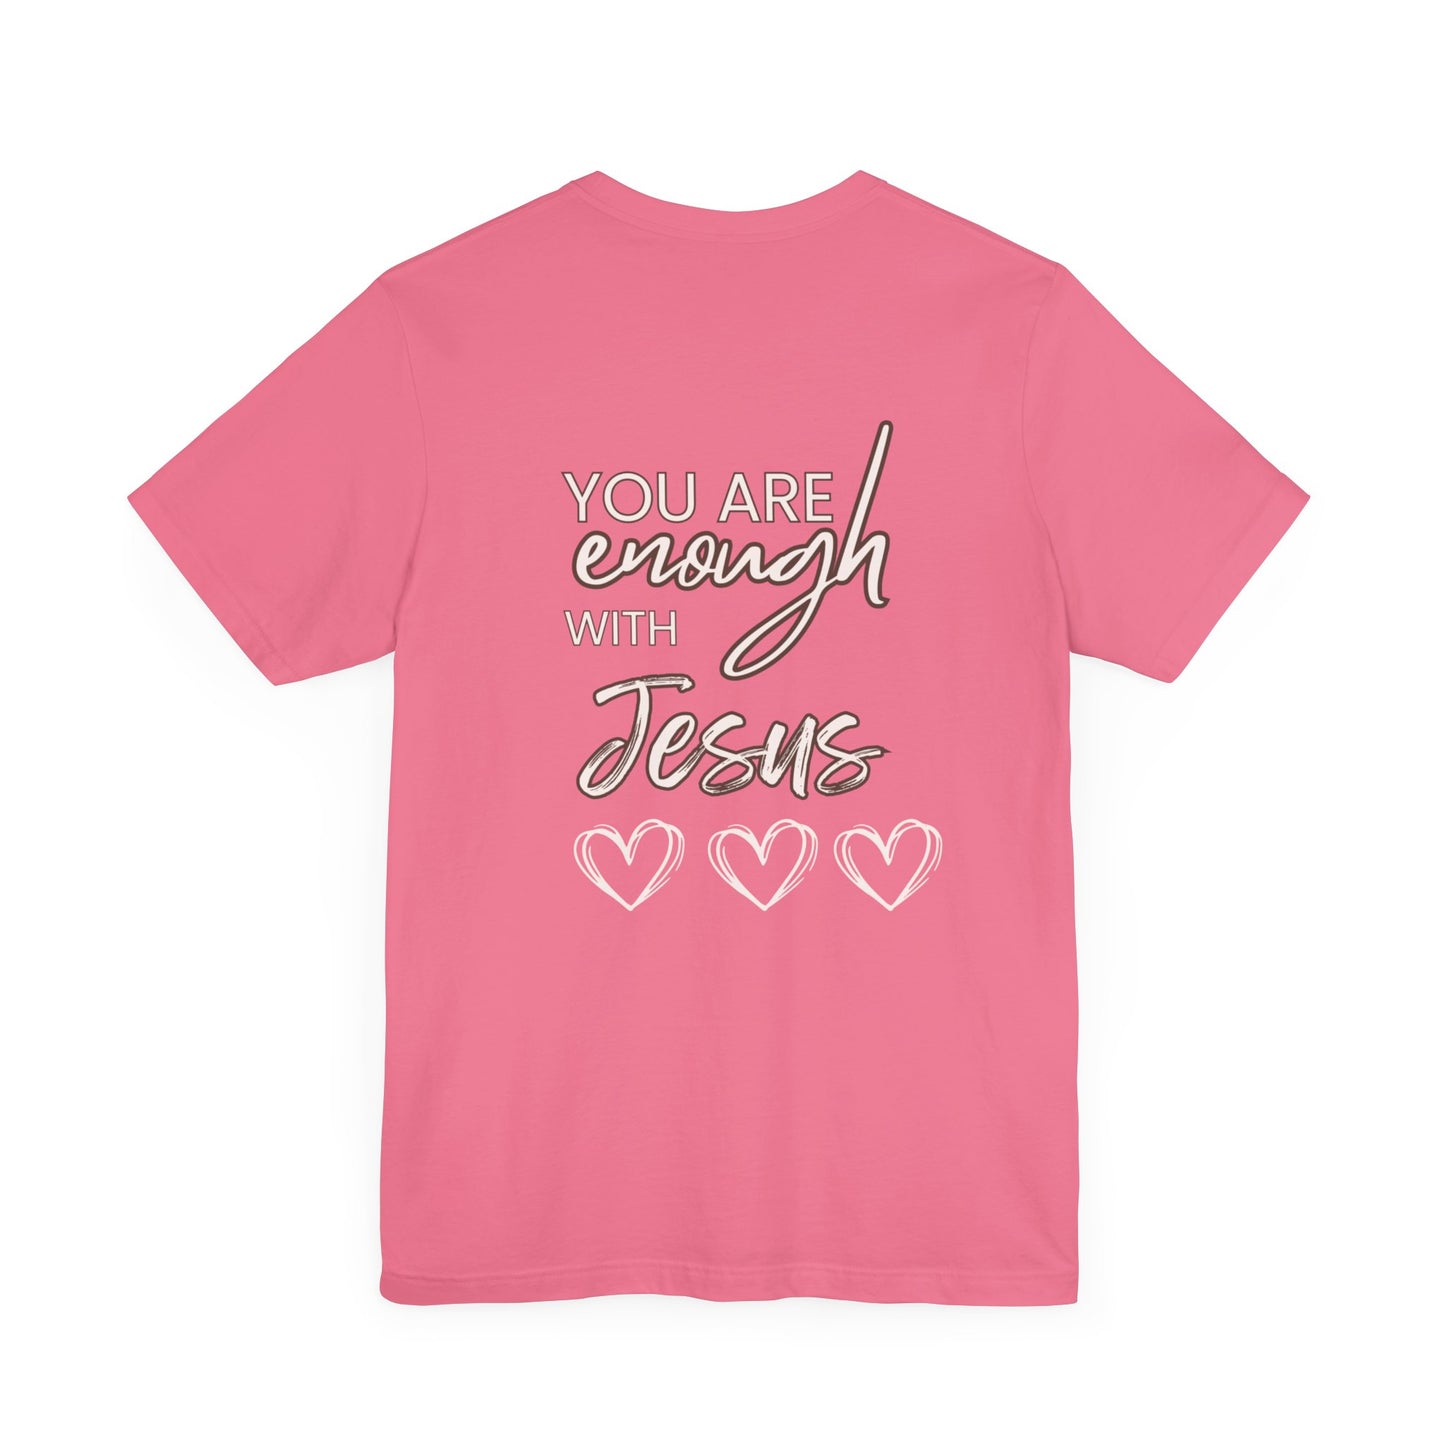 Bella+Canvas Unisex Jersey Short Sleeve Tee front- "Just Believe" back "Your Enough with Jesus"